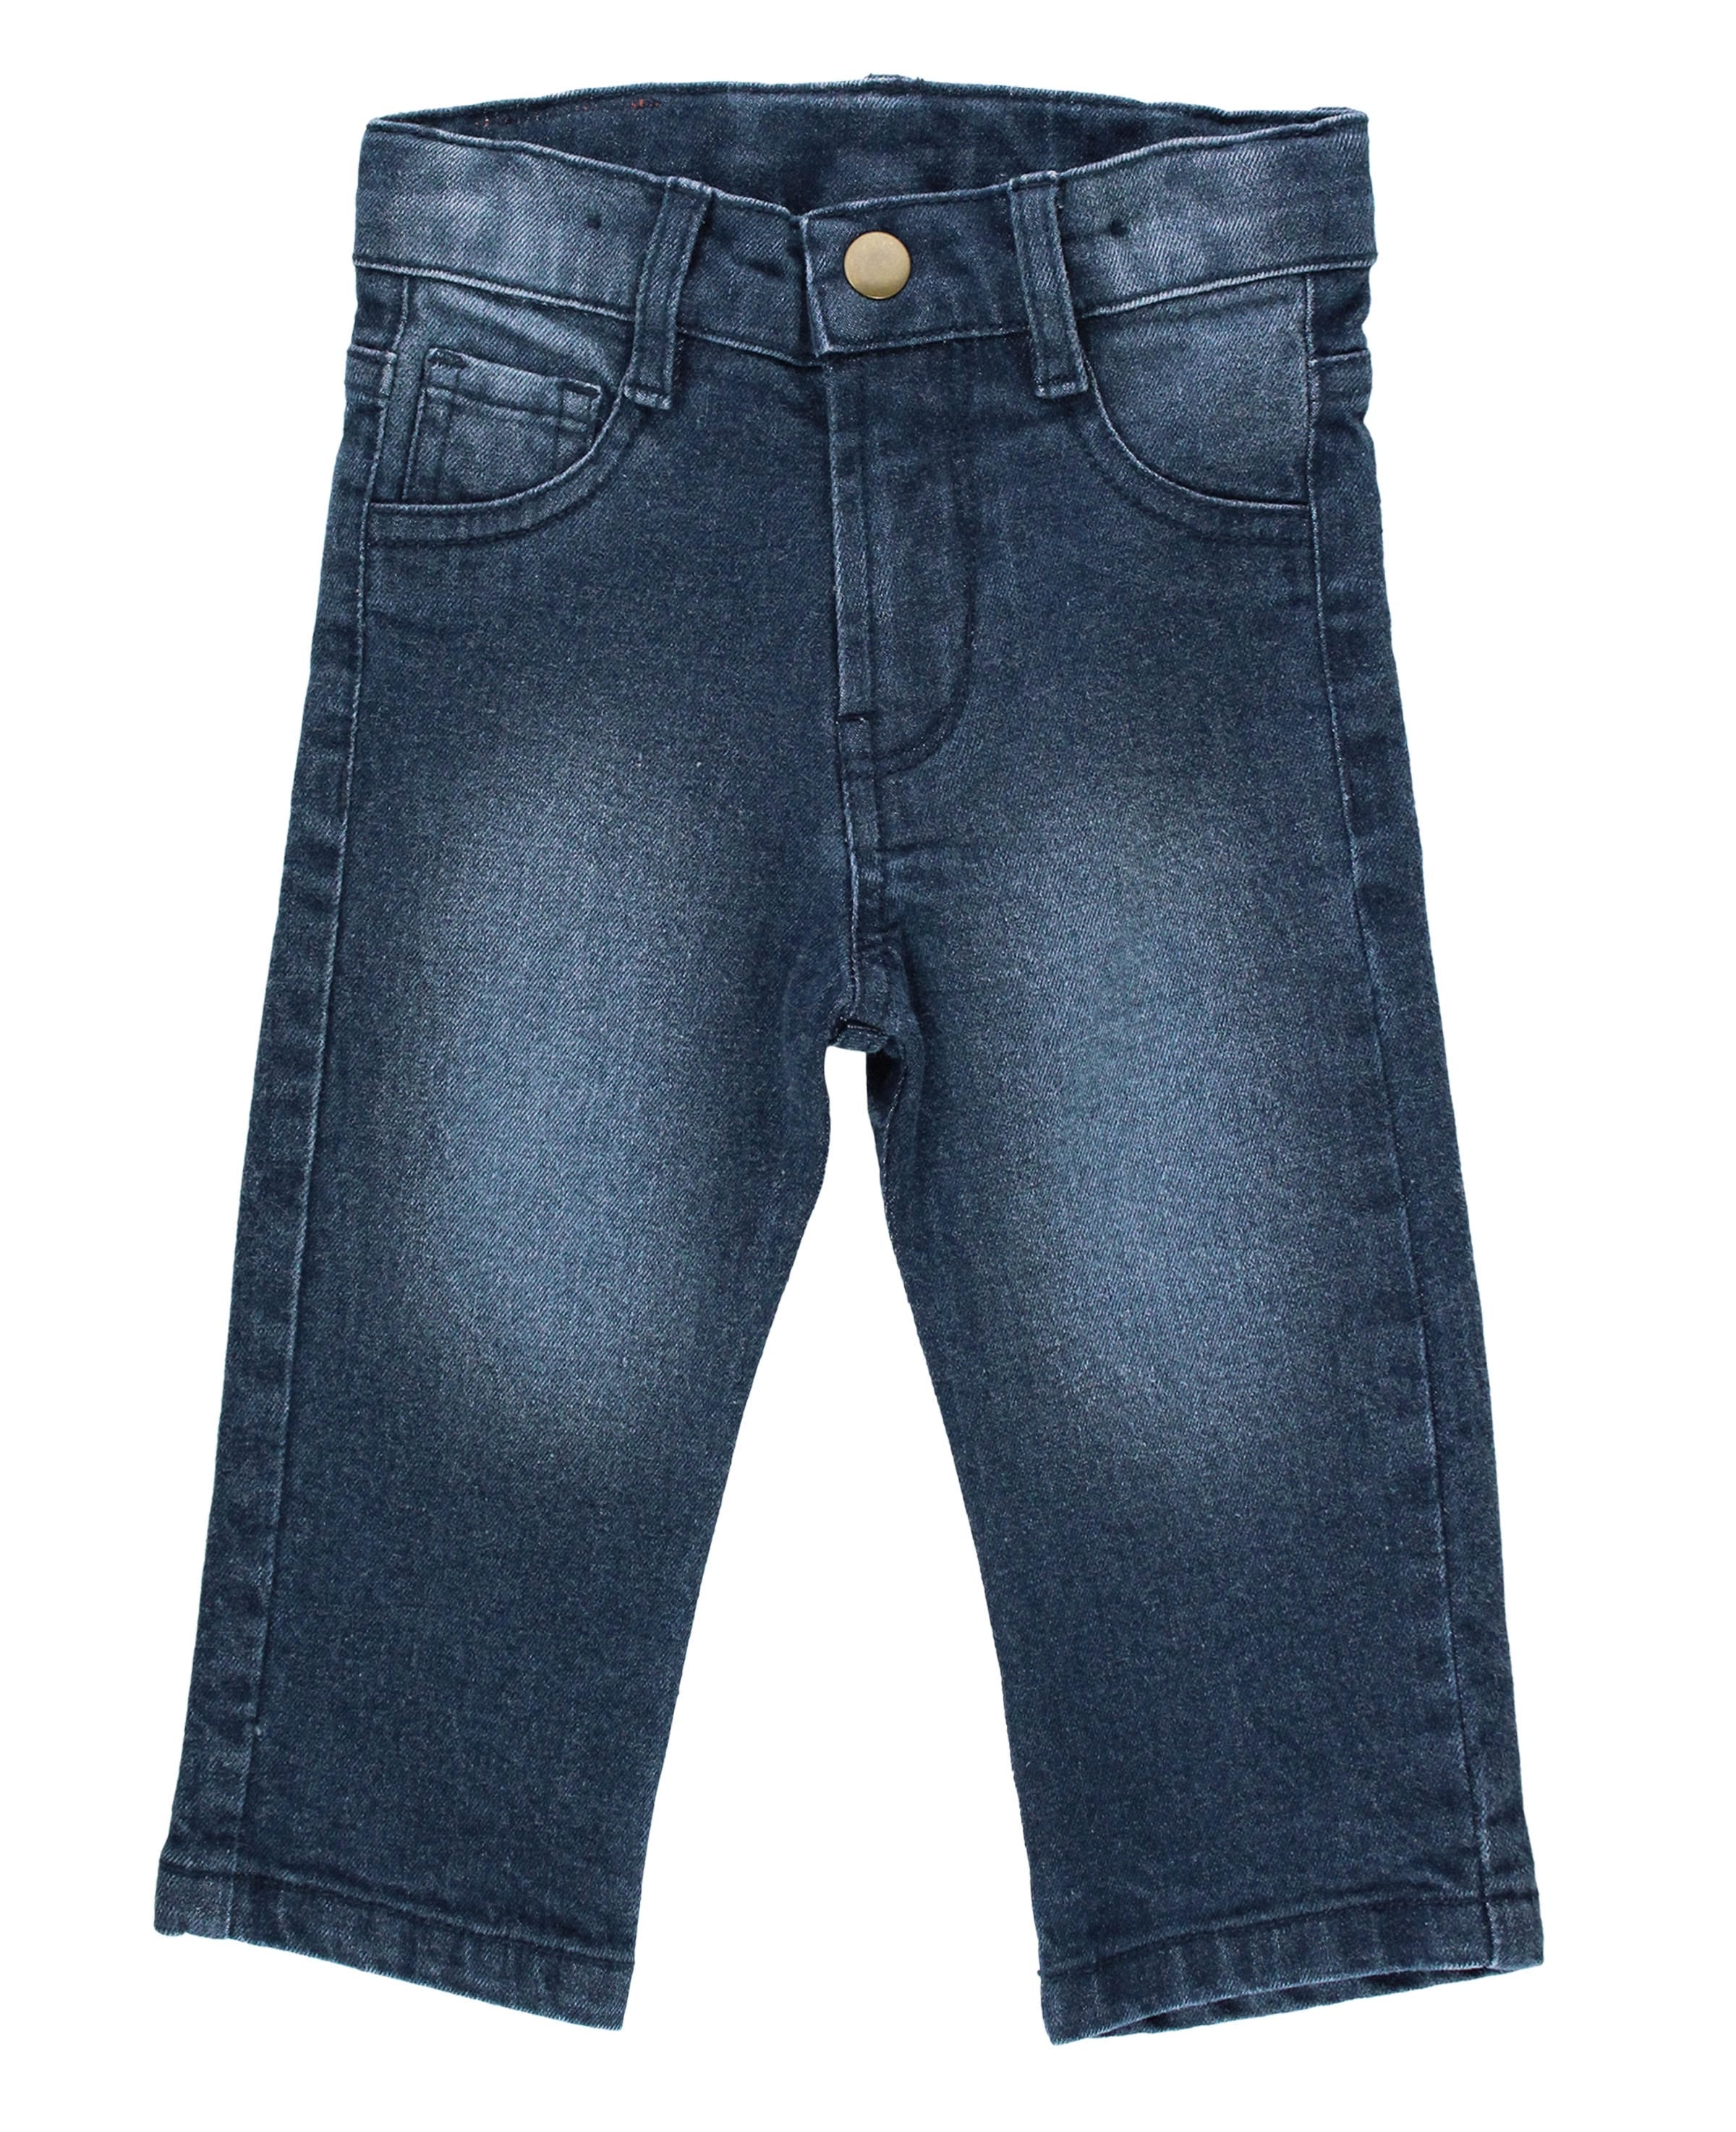 Rugged Butts Medium Wash Straight Jeans